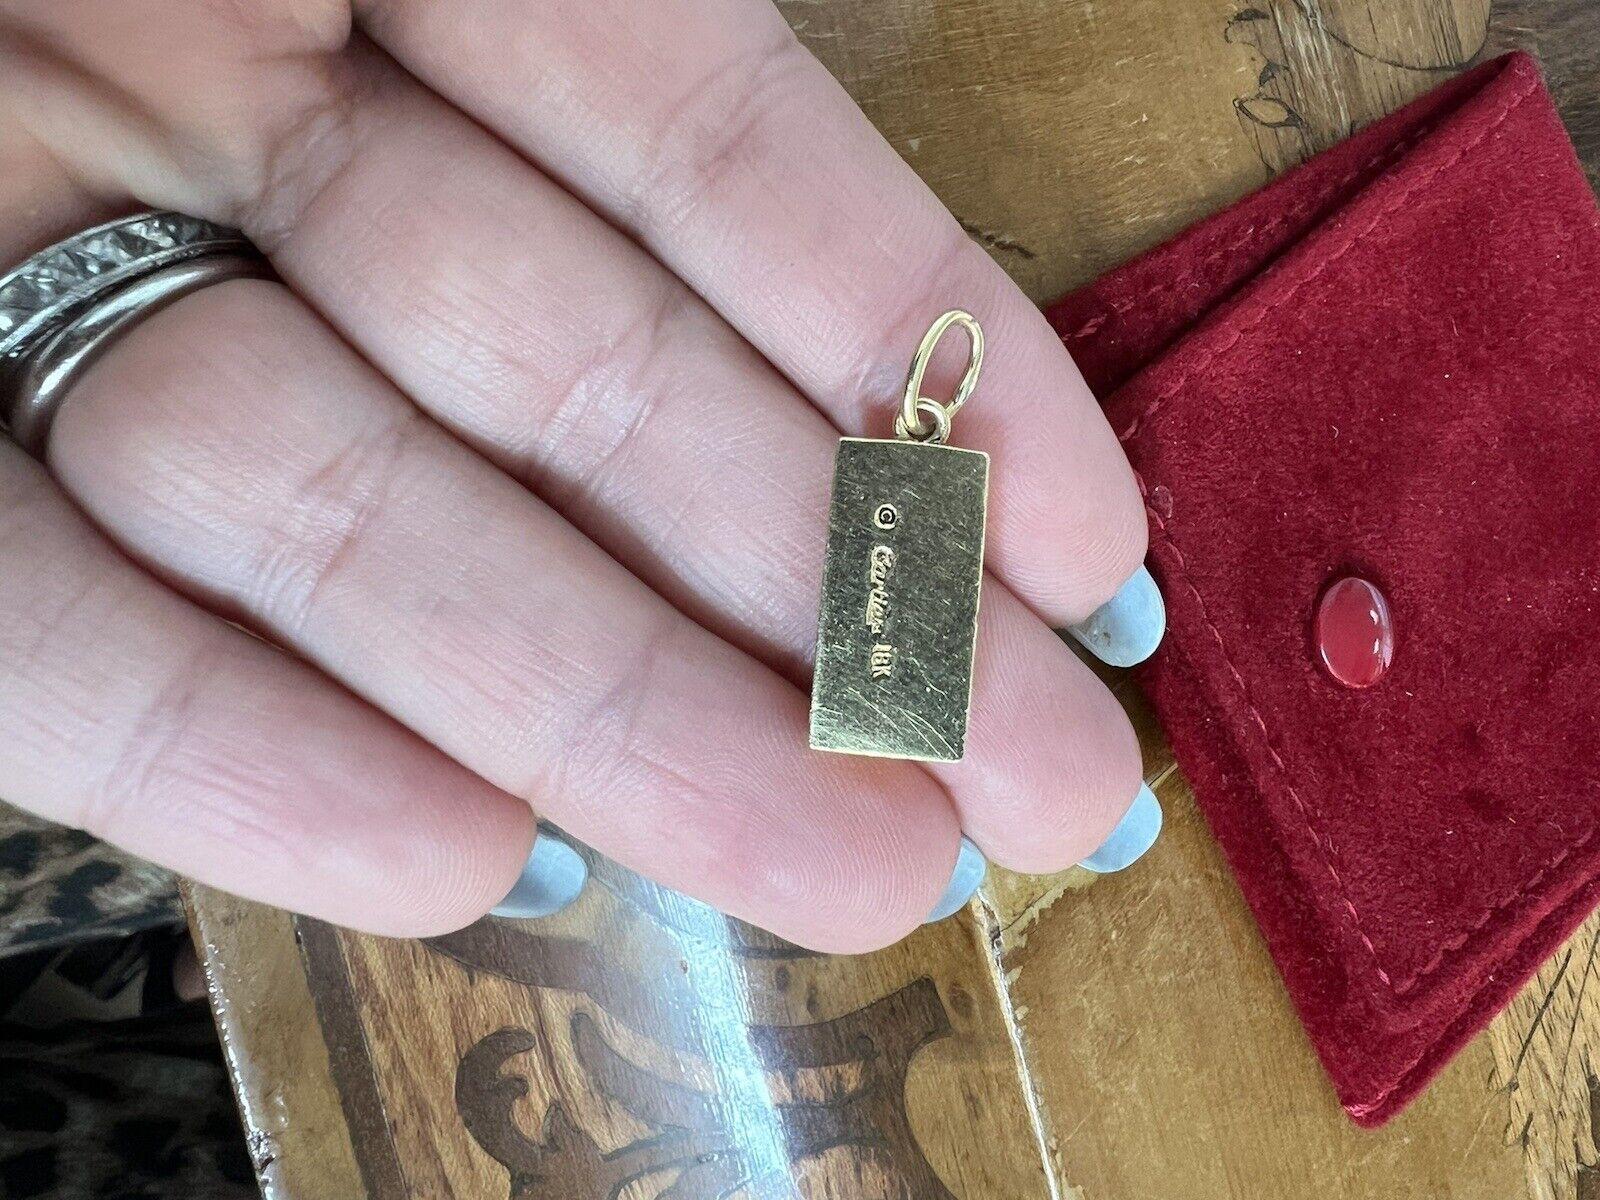 Cartier 18k Yellow Gold 1/4 Oz Ingot Charm Pendant Vintage Circa 1970s


Here is your chance to purchase a beautiful and highly collectible designer charm pendant.  Truly a great piece at a great price! 

Details:
Size : 1/4 oz ingot charm
9.7